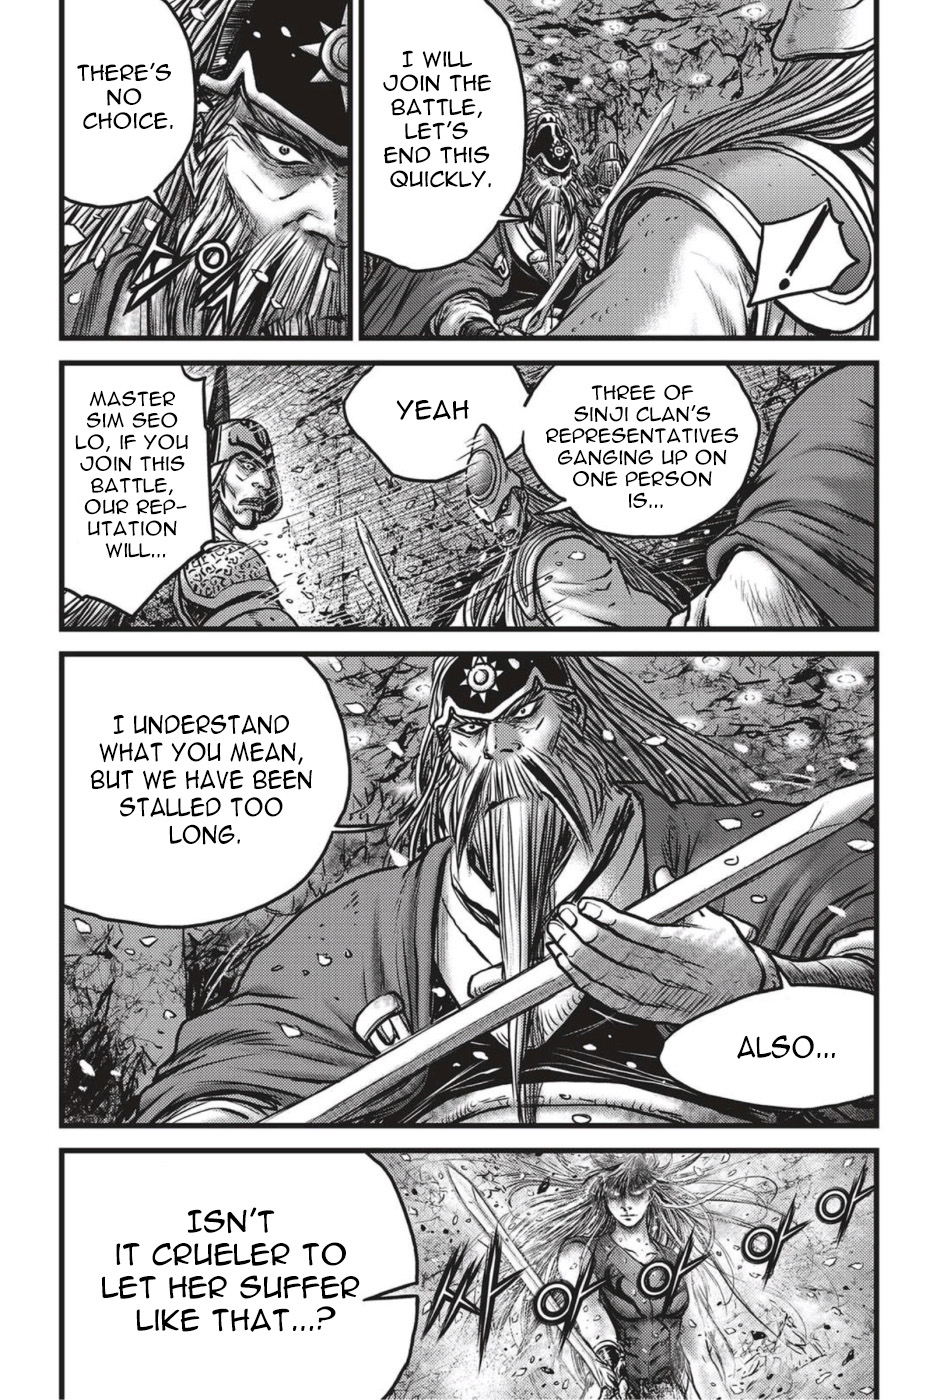 Ruler of the Land Vol.68 Ch.497